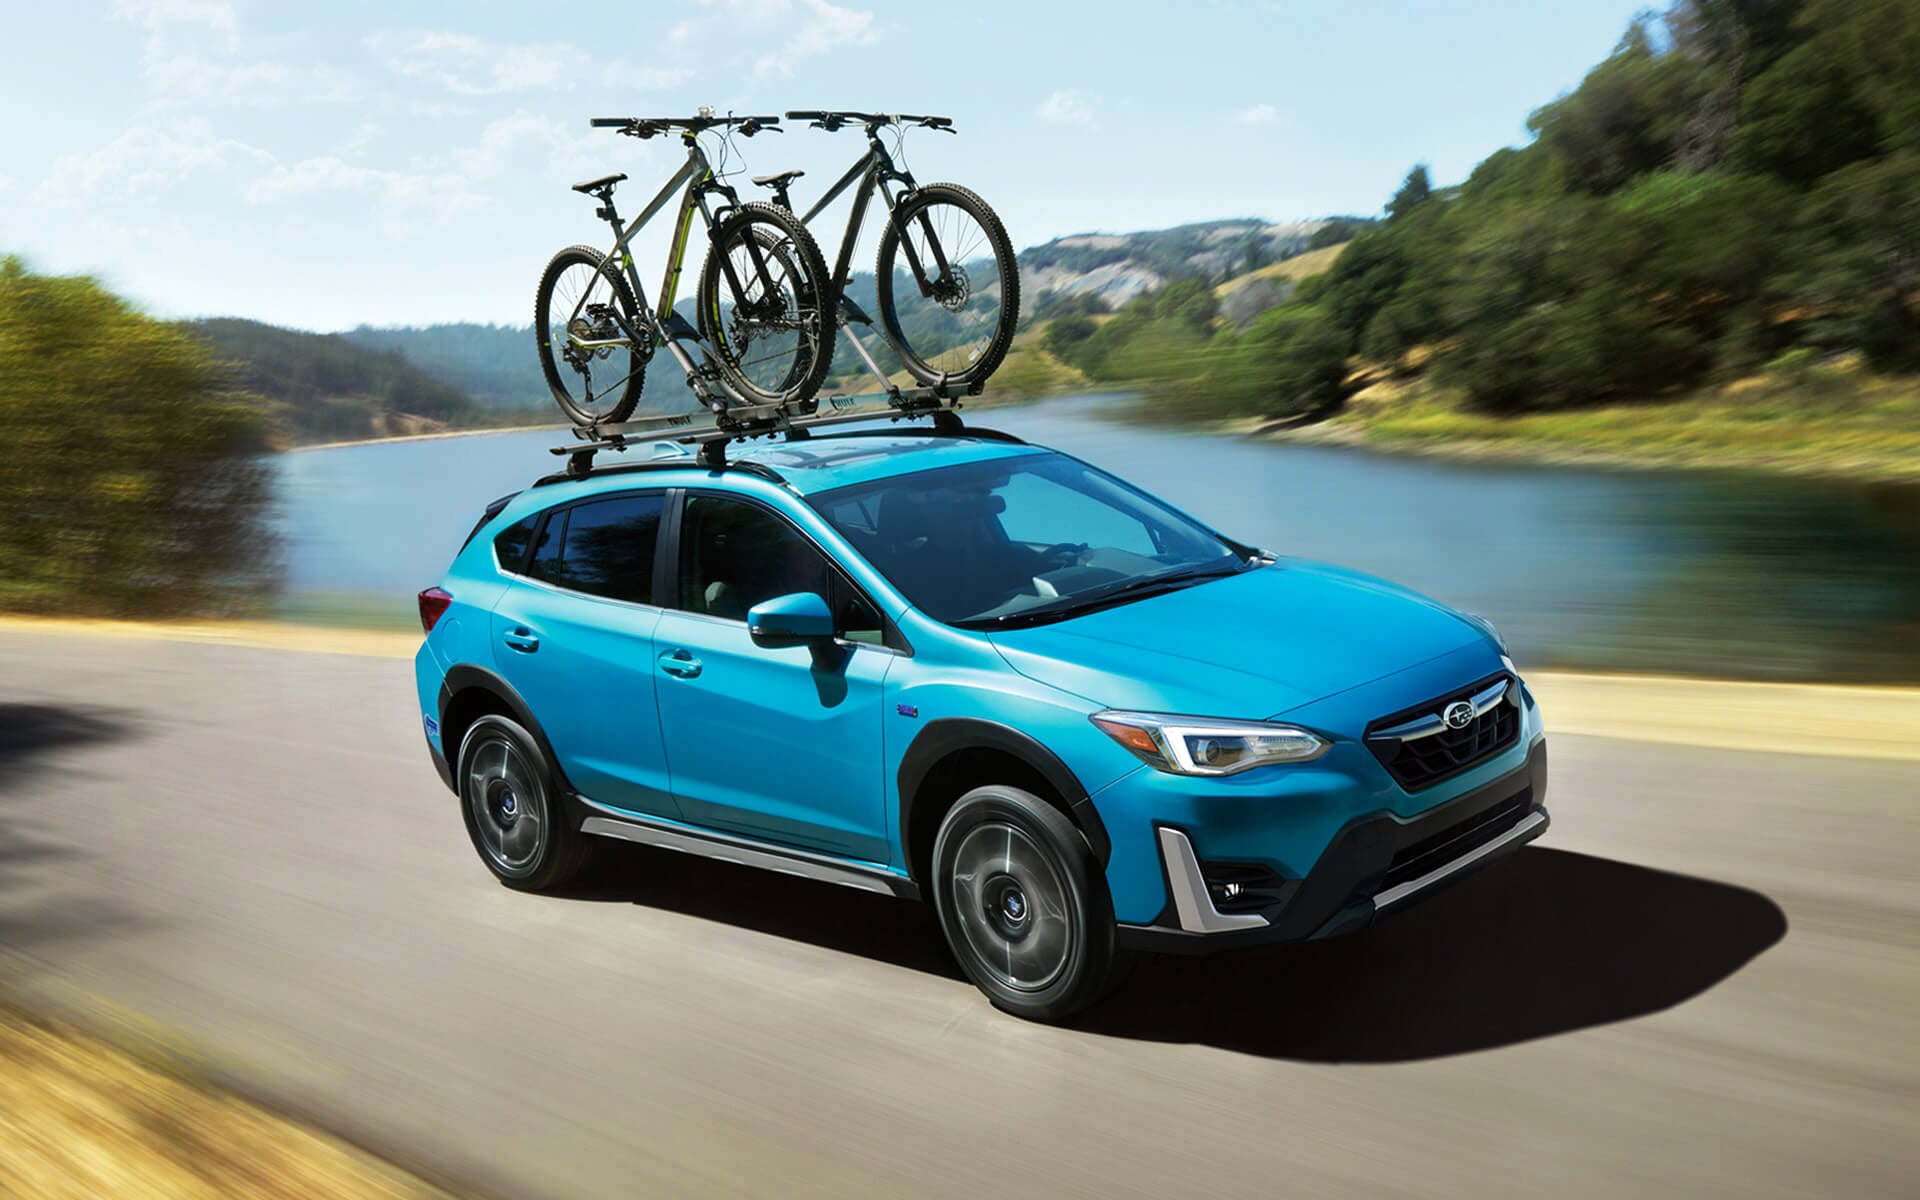 A blue Crosstrek Hybrid with two bicycles on its roof rack driving beside a river | Subaru Superstore of Chandler in Chandler AZ